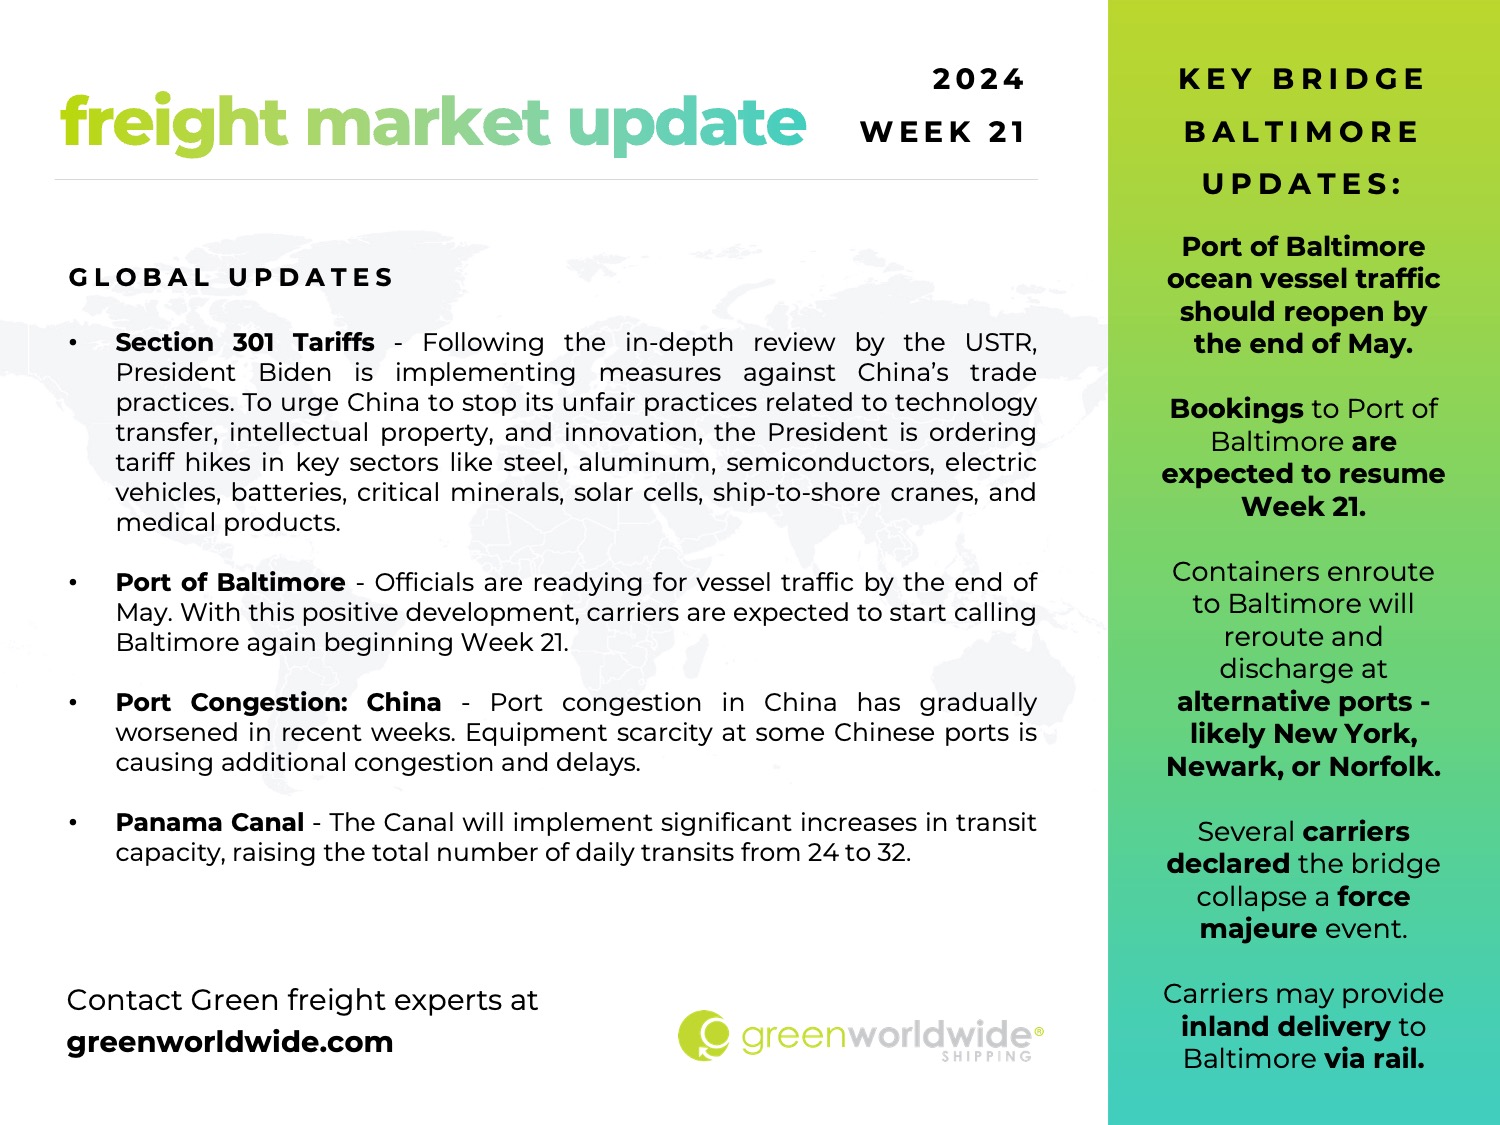 freight market update, week 21, port congestion china, paris olymics, port of baltimore, panama canal, section 301